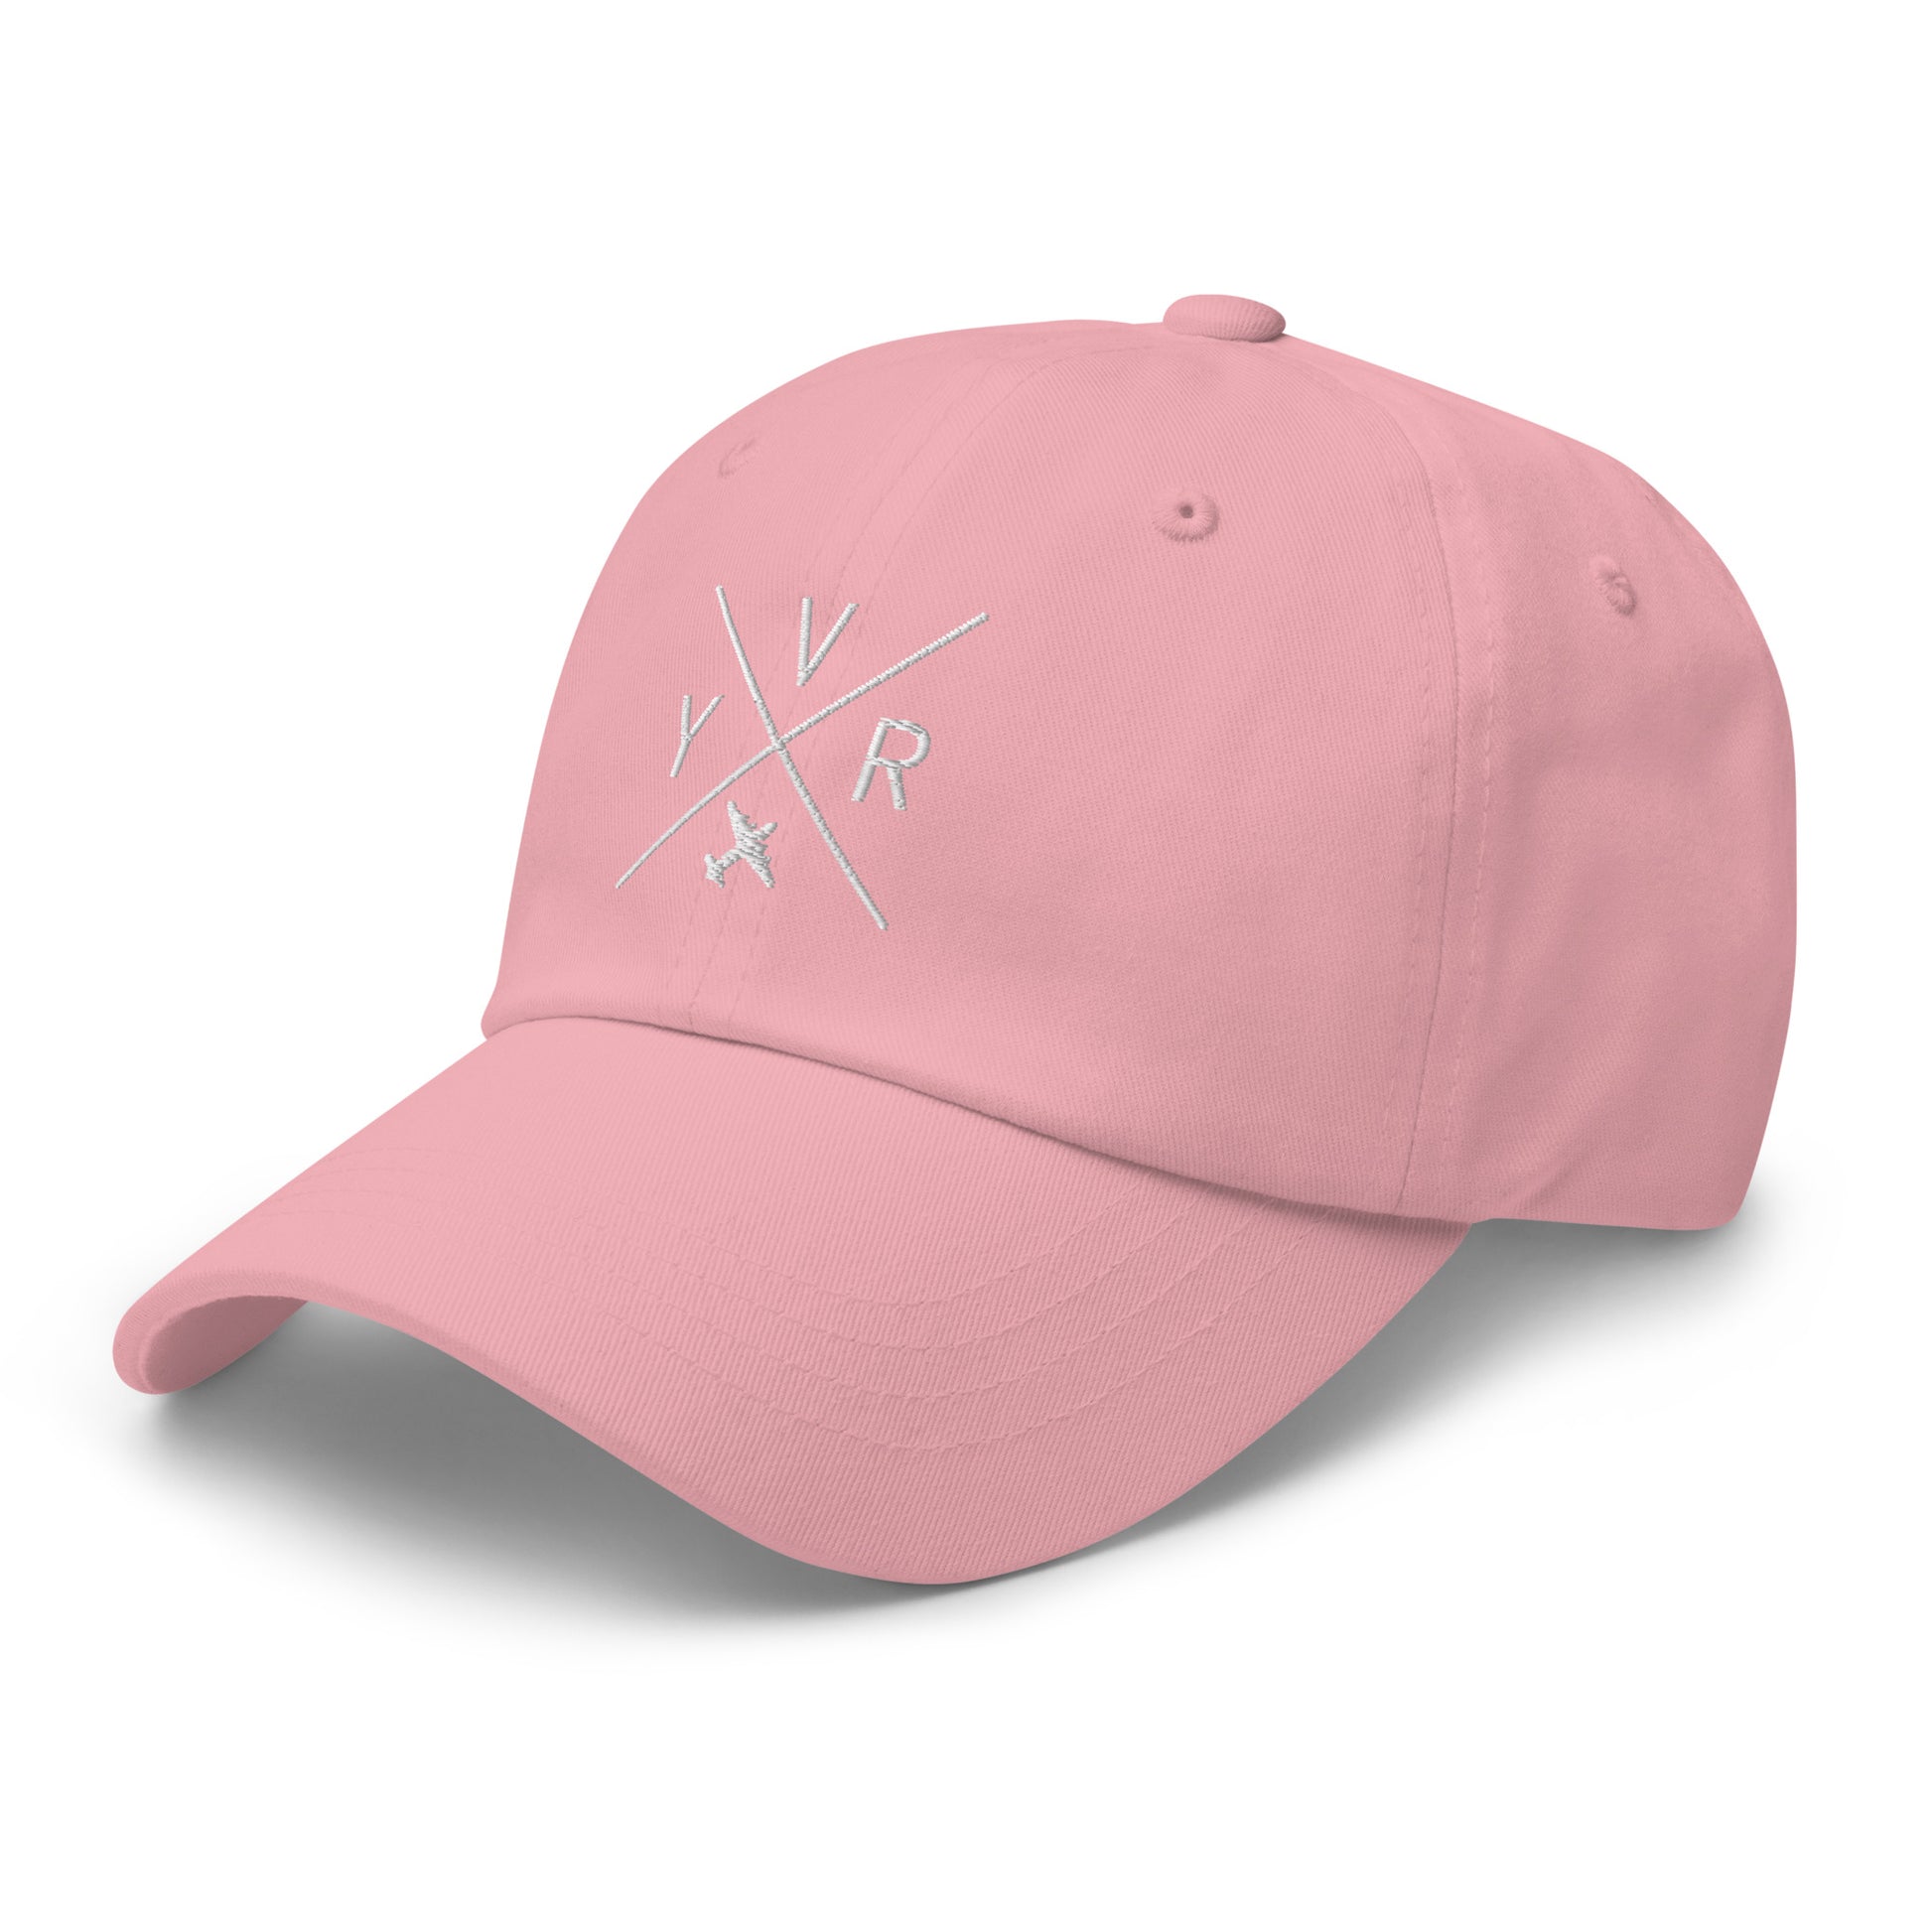 Crossed-X Dad Hat - White • YVR Vancouver • YHM Designs - Image 20